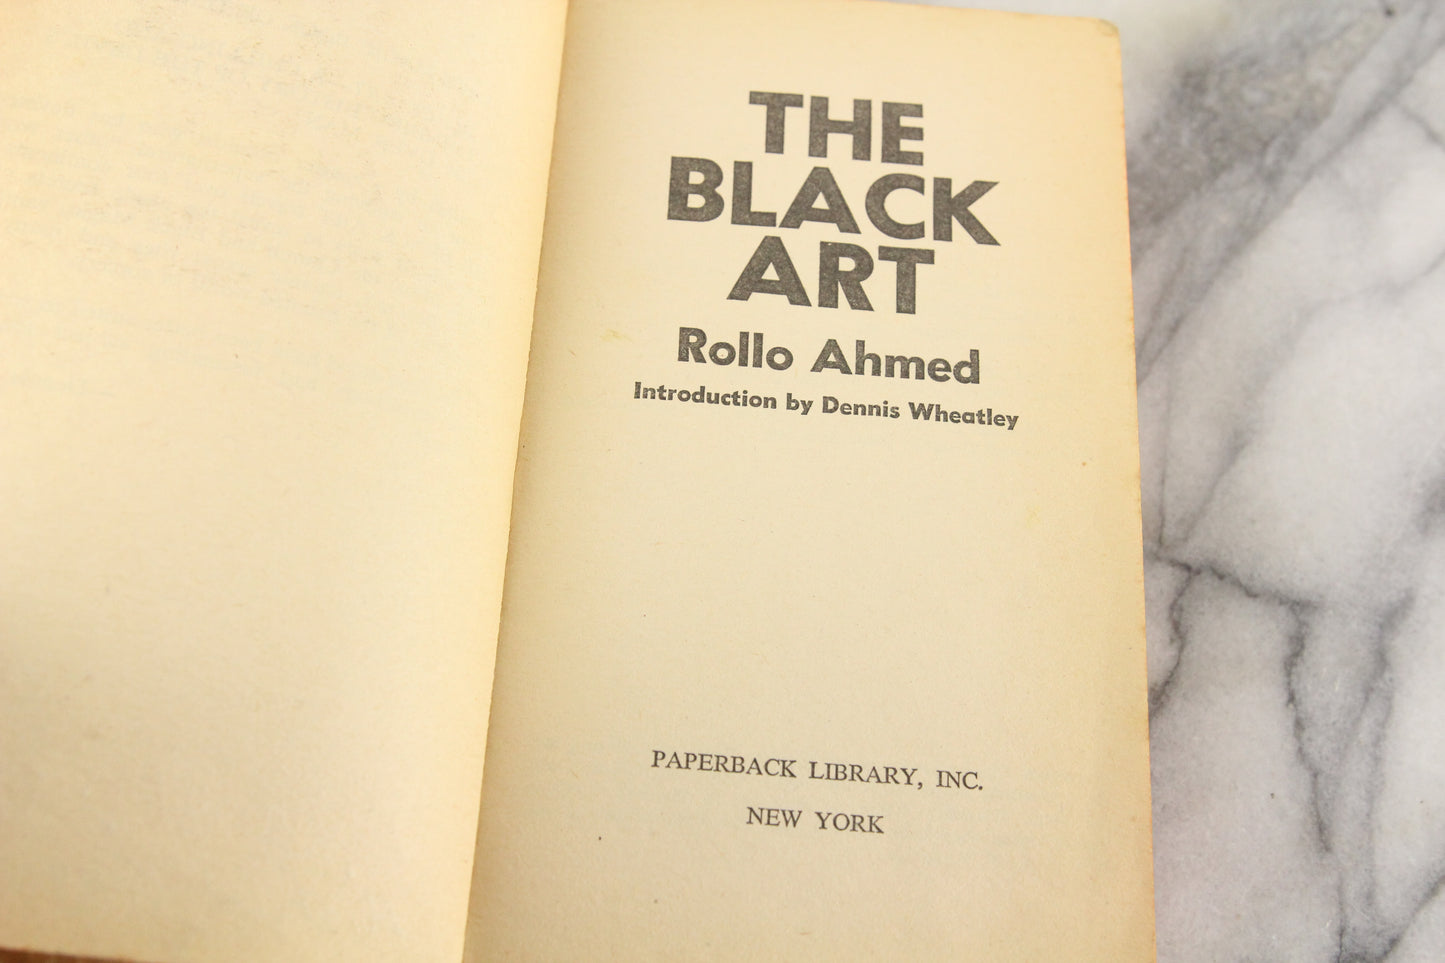 A Black Magic Book of Terror: The Black Art by Rollo Ahmed, Copyright 1968